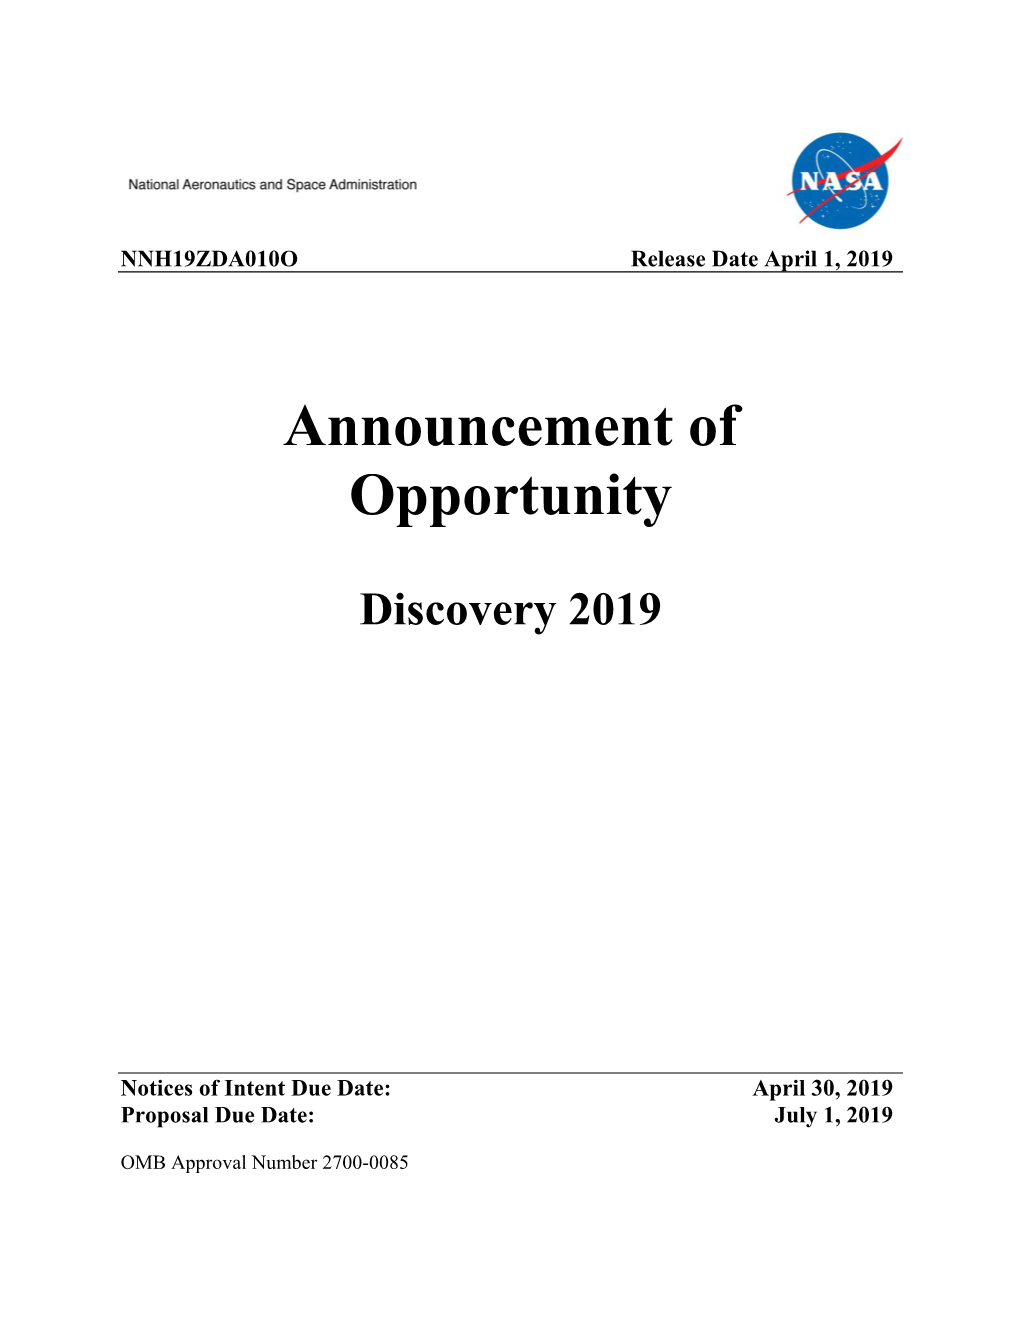 Announcement of Opportunity